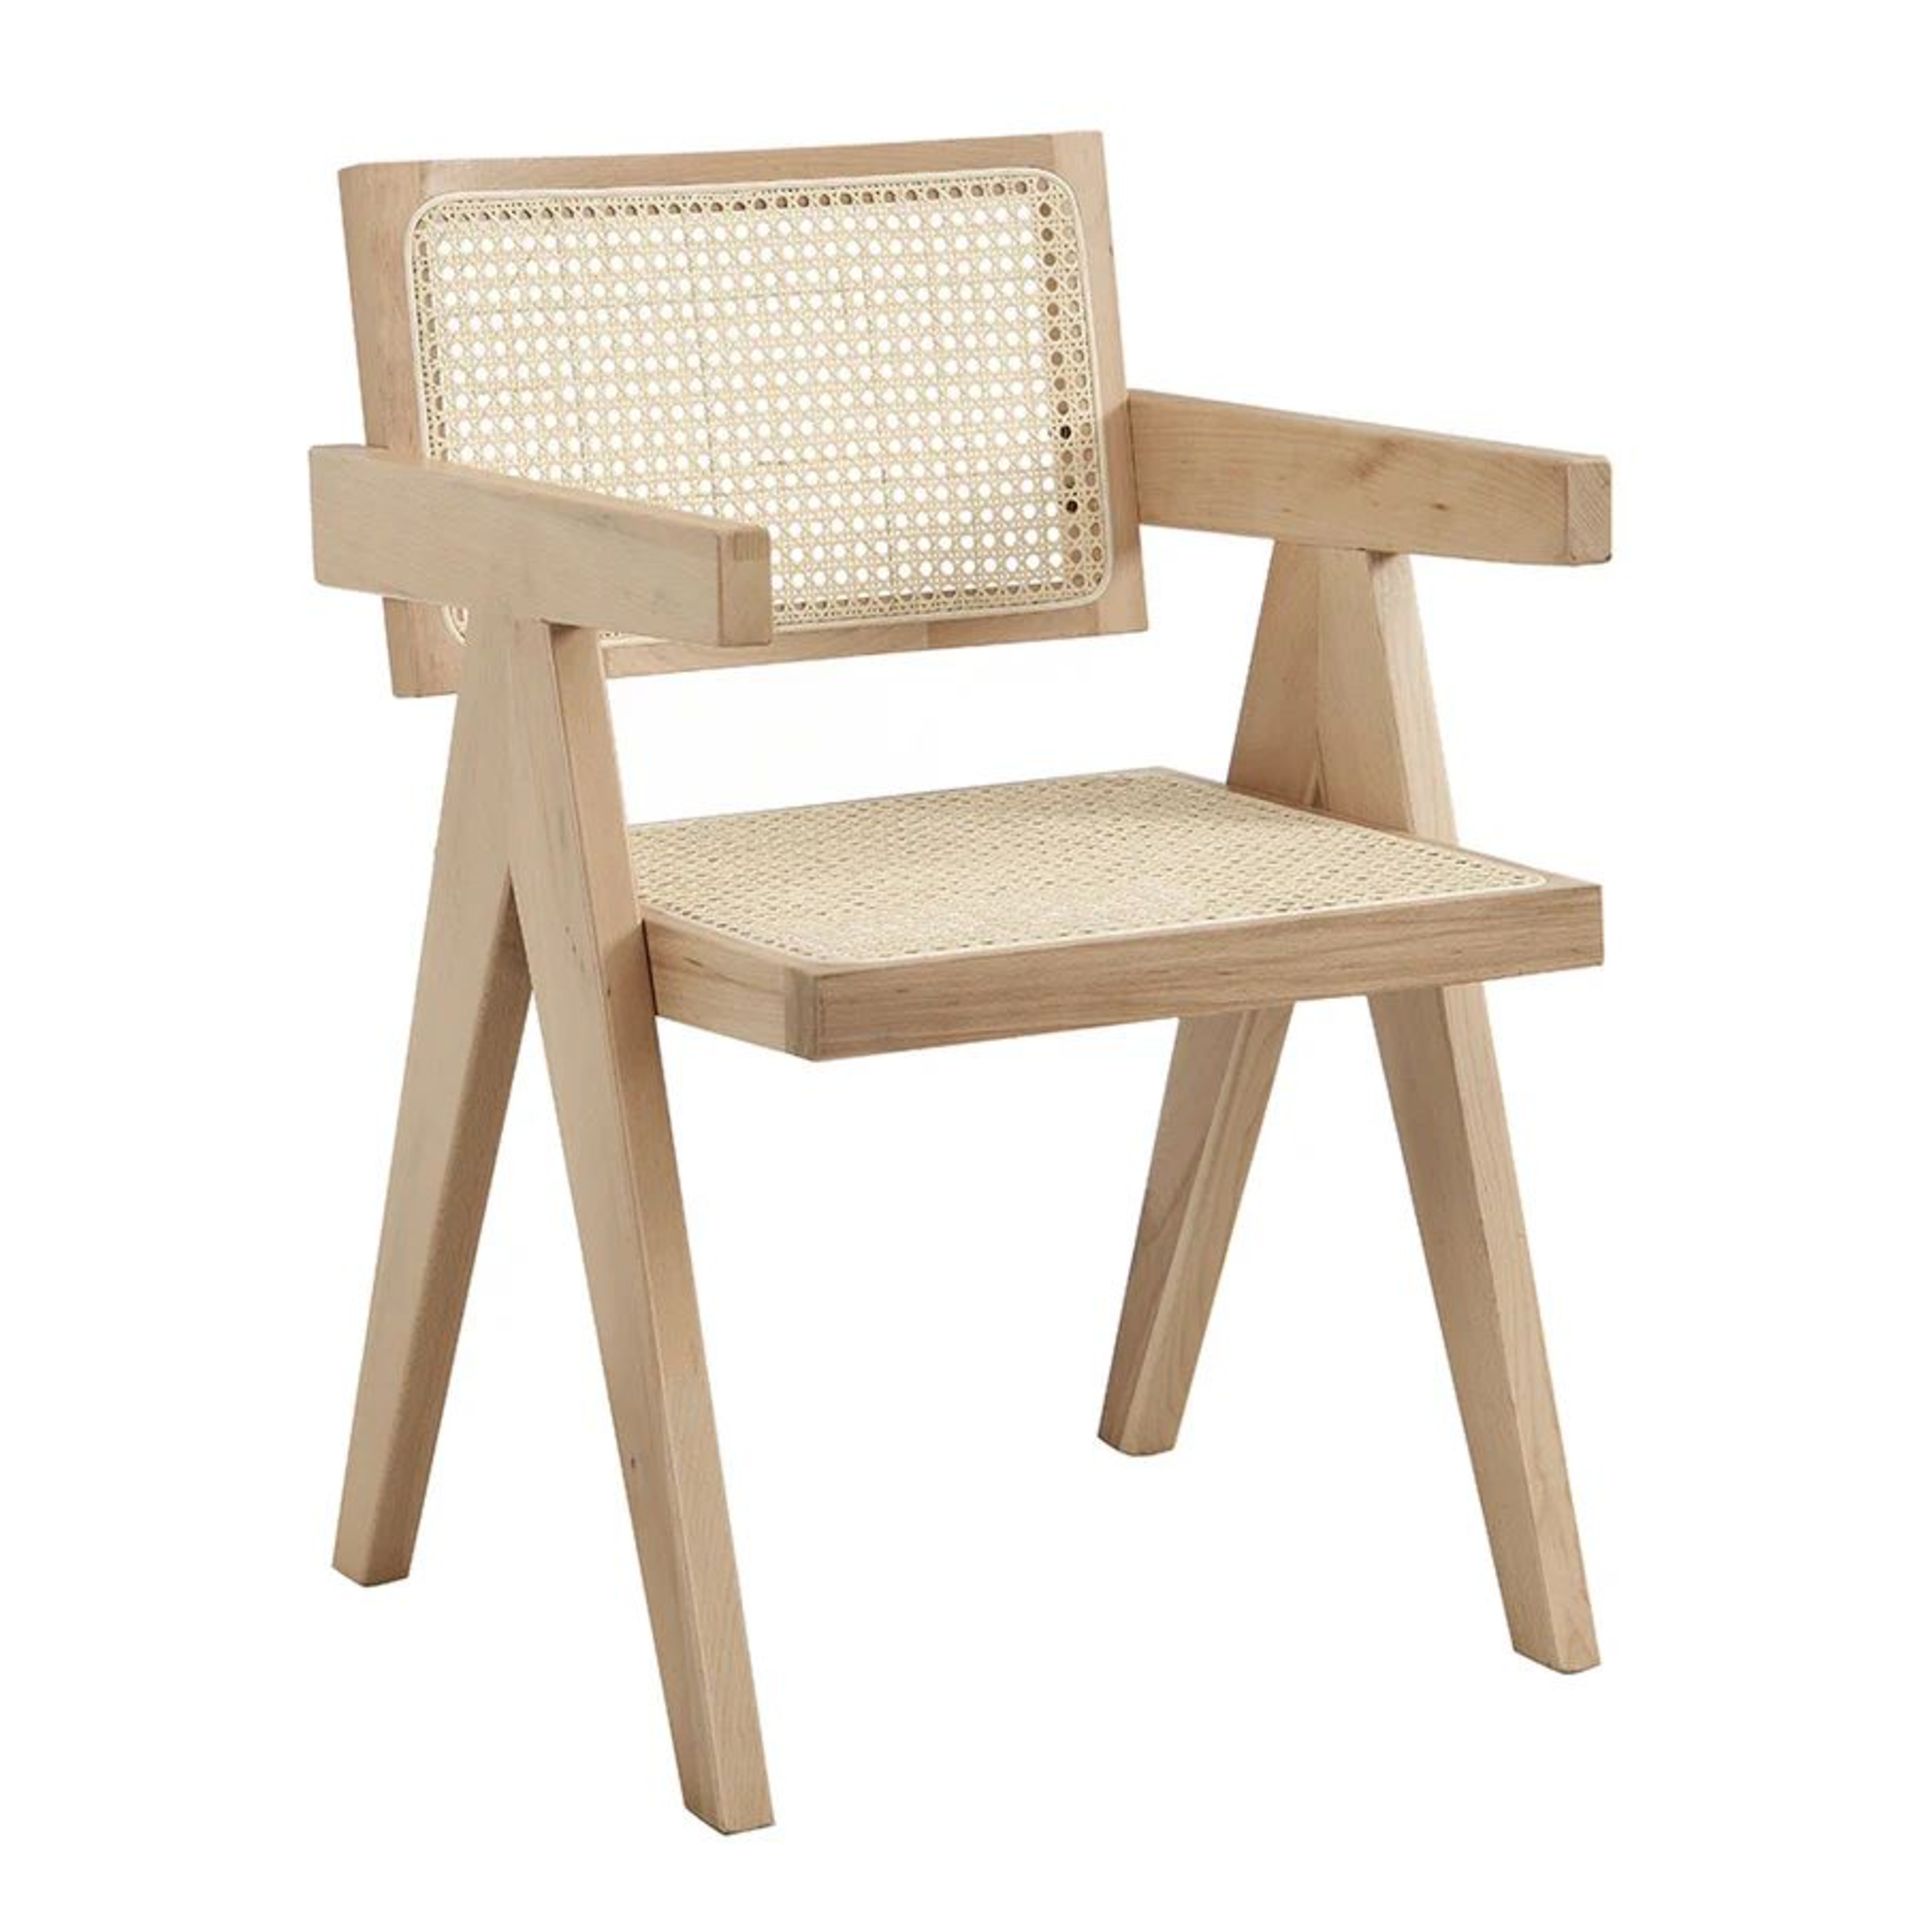 Jeanne Natural Colour Cane Rattan Solid Beech Wood Dining Chair. - R19.1. RRP £209.99. The cane - Image 2 of 2